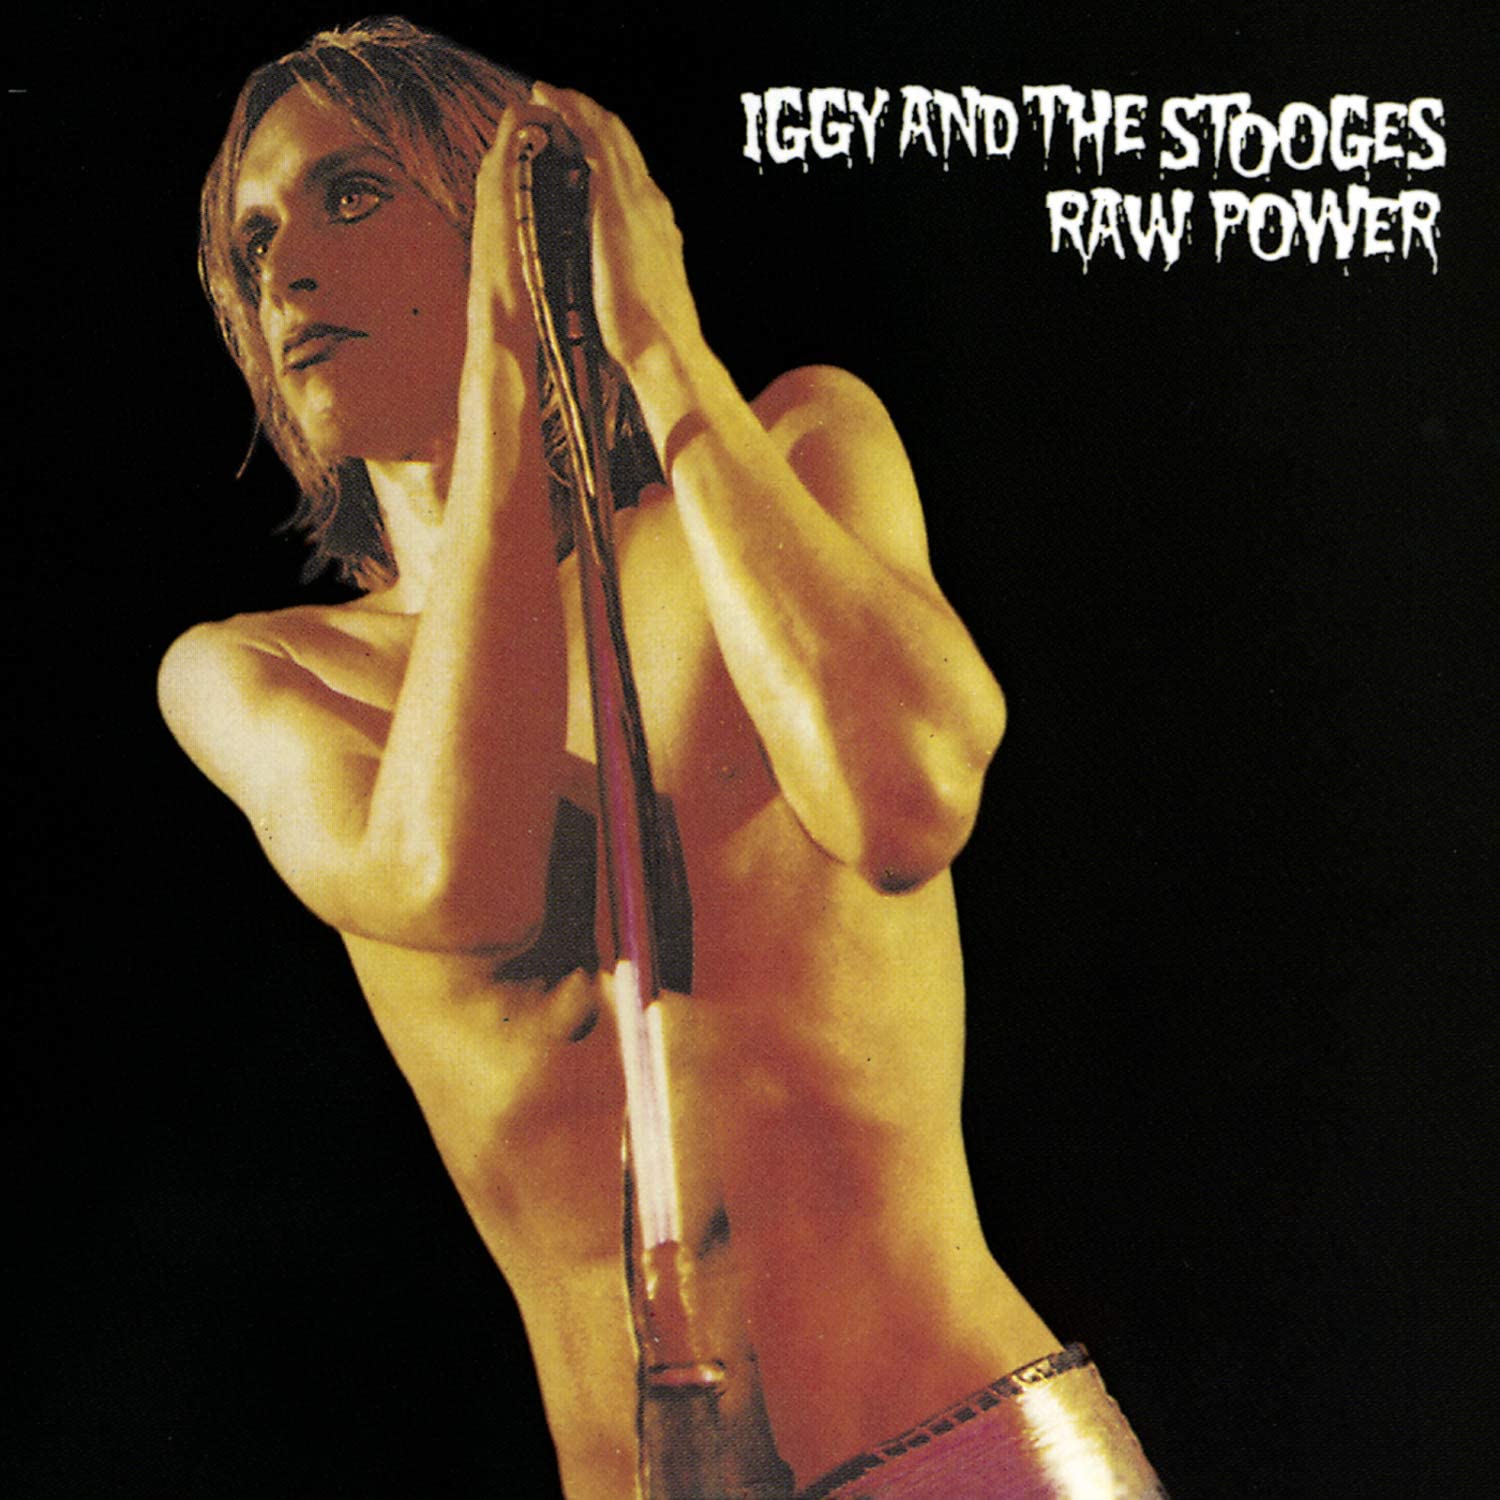 Iggy and The Stooges-Raw Power (Iggy Mix)-24-192-WEB-FLAC-REMASTERED-2023-OBZEN